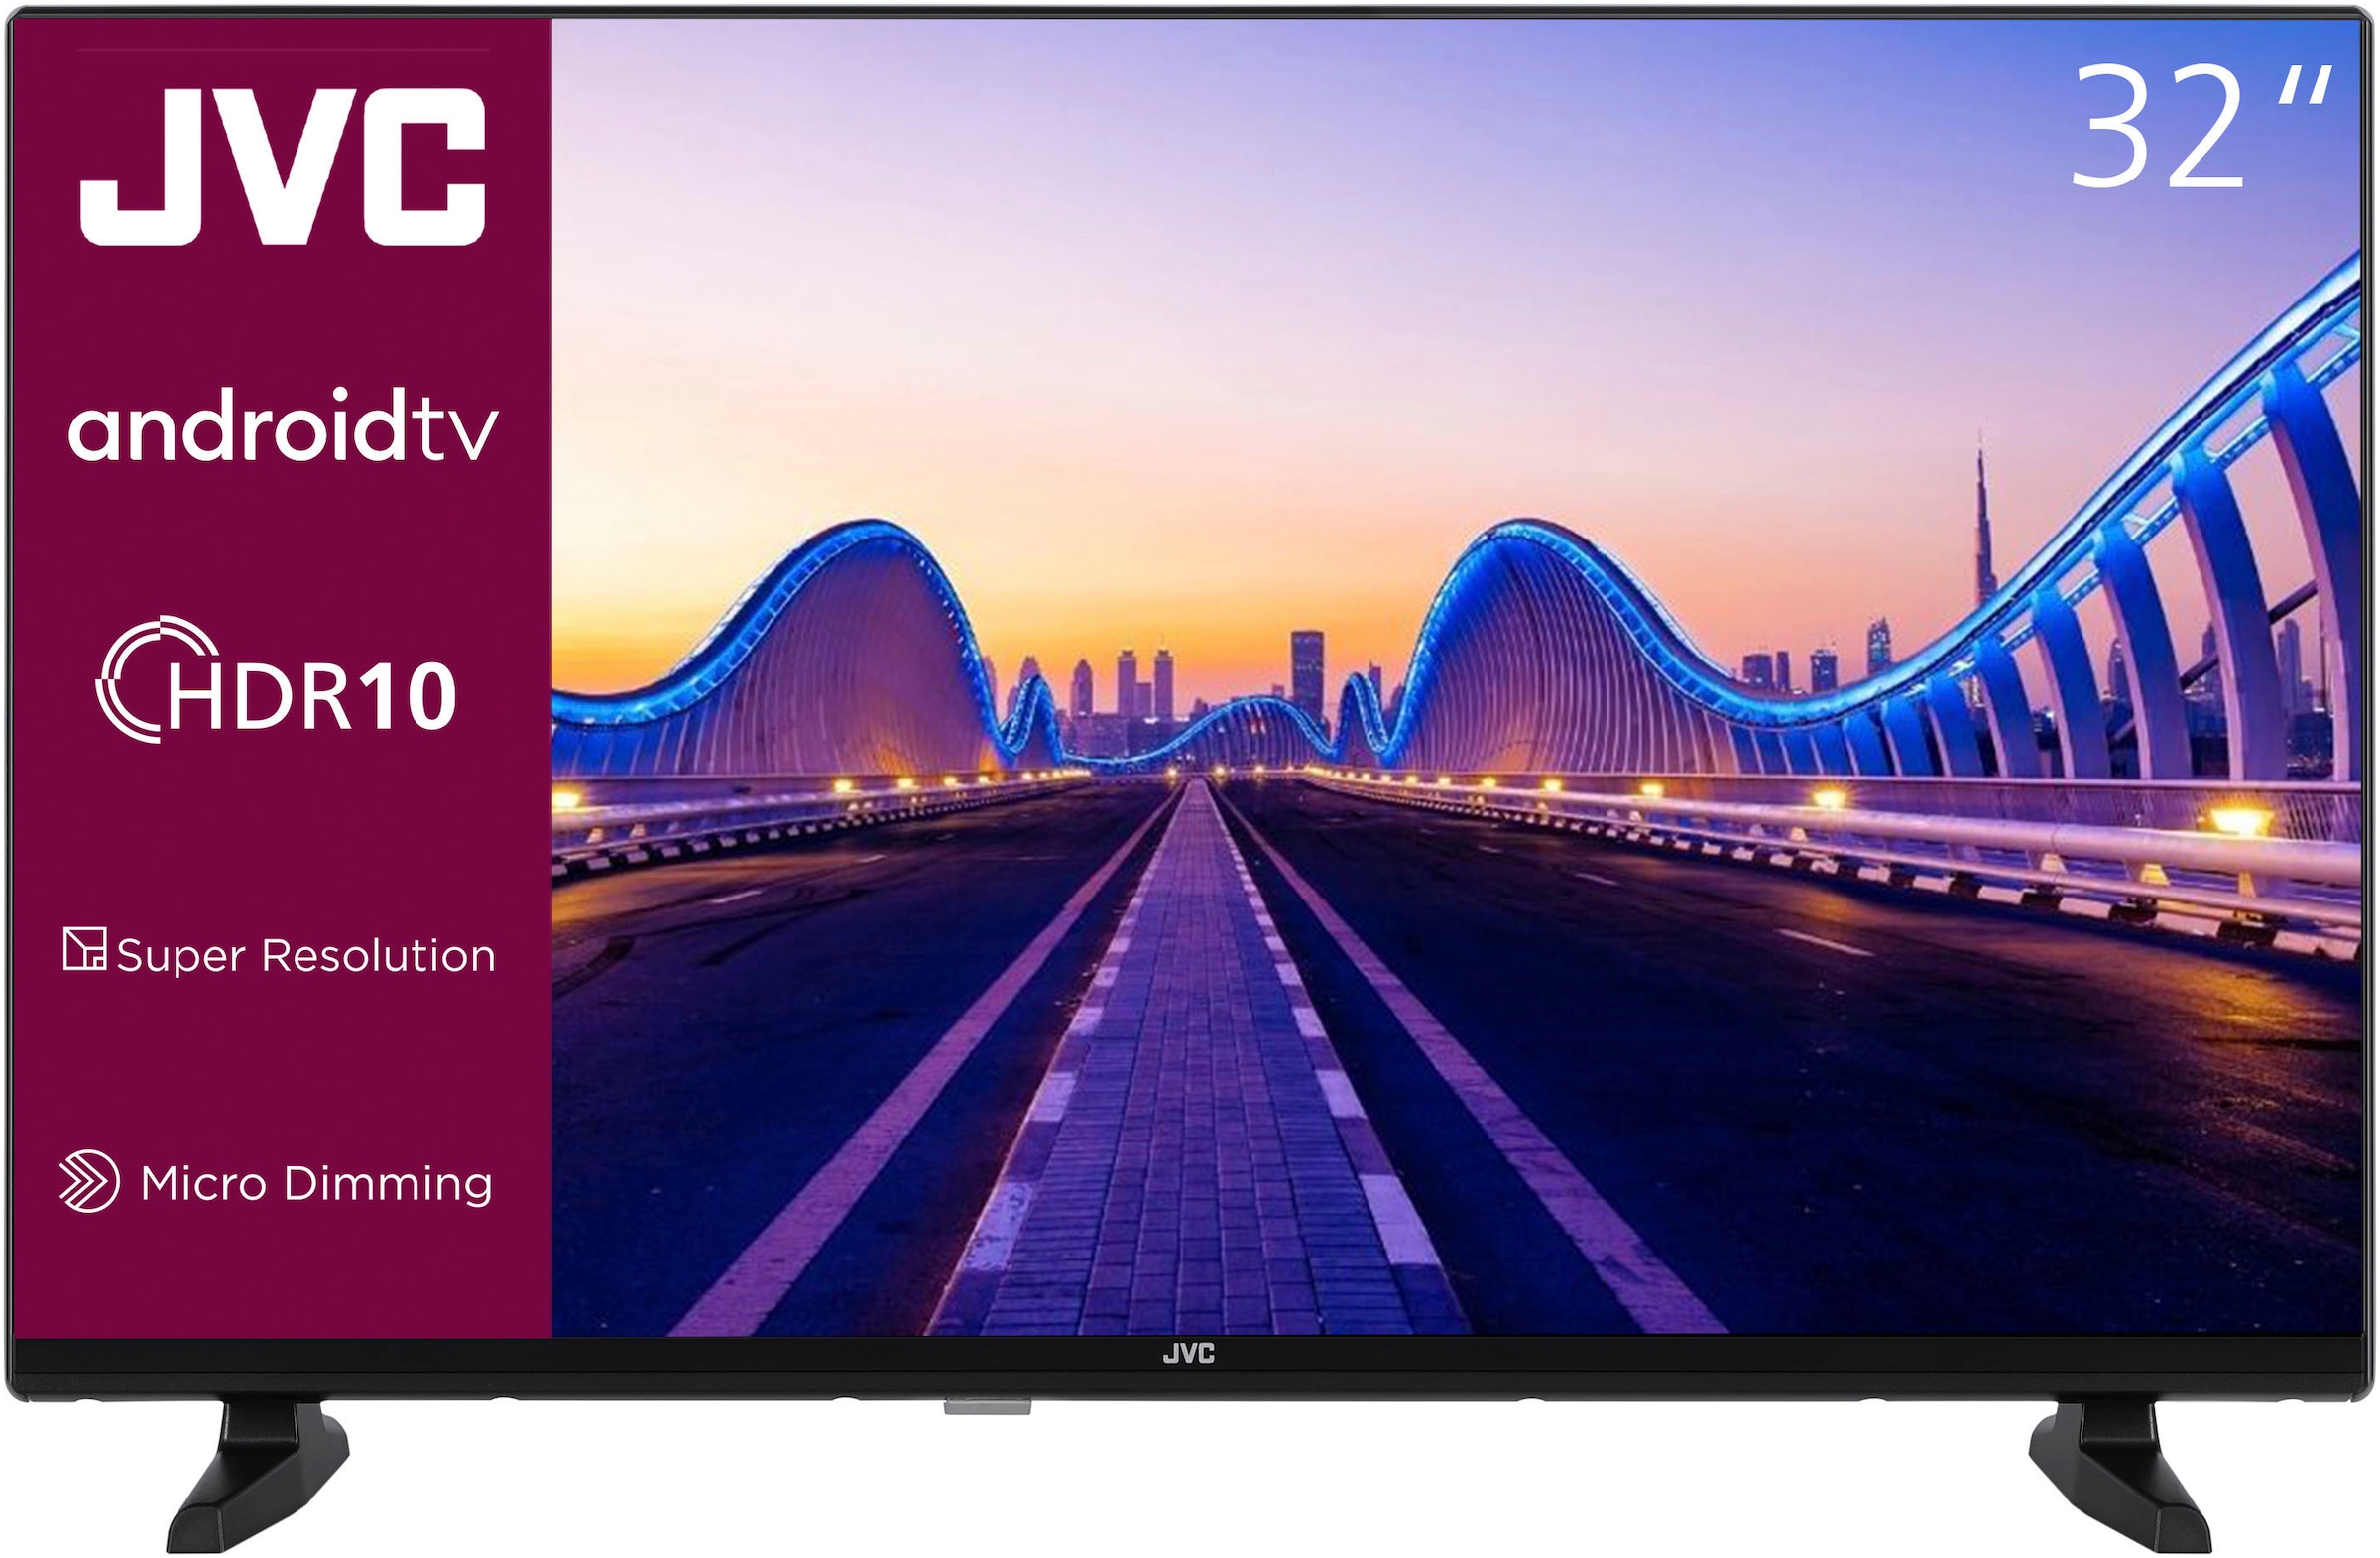 JVC LCD-LED Fernseher, 80 cm/32 Zoll, HD, Android TV-Smart-TV